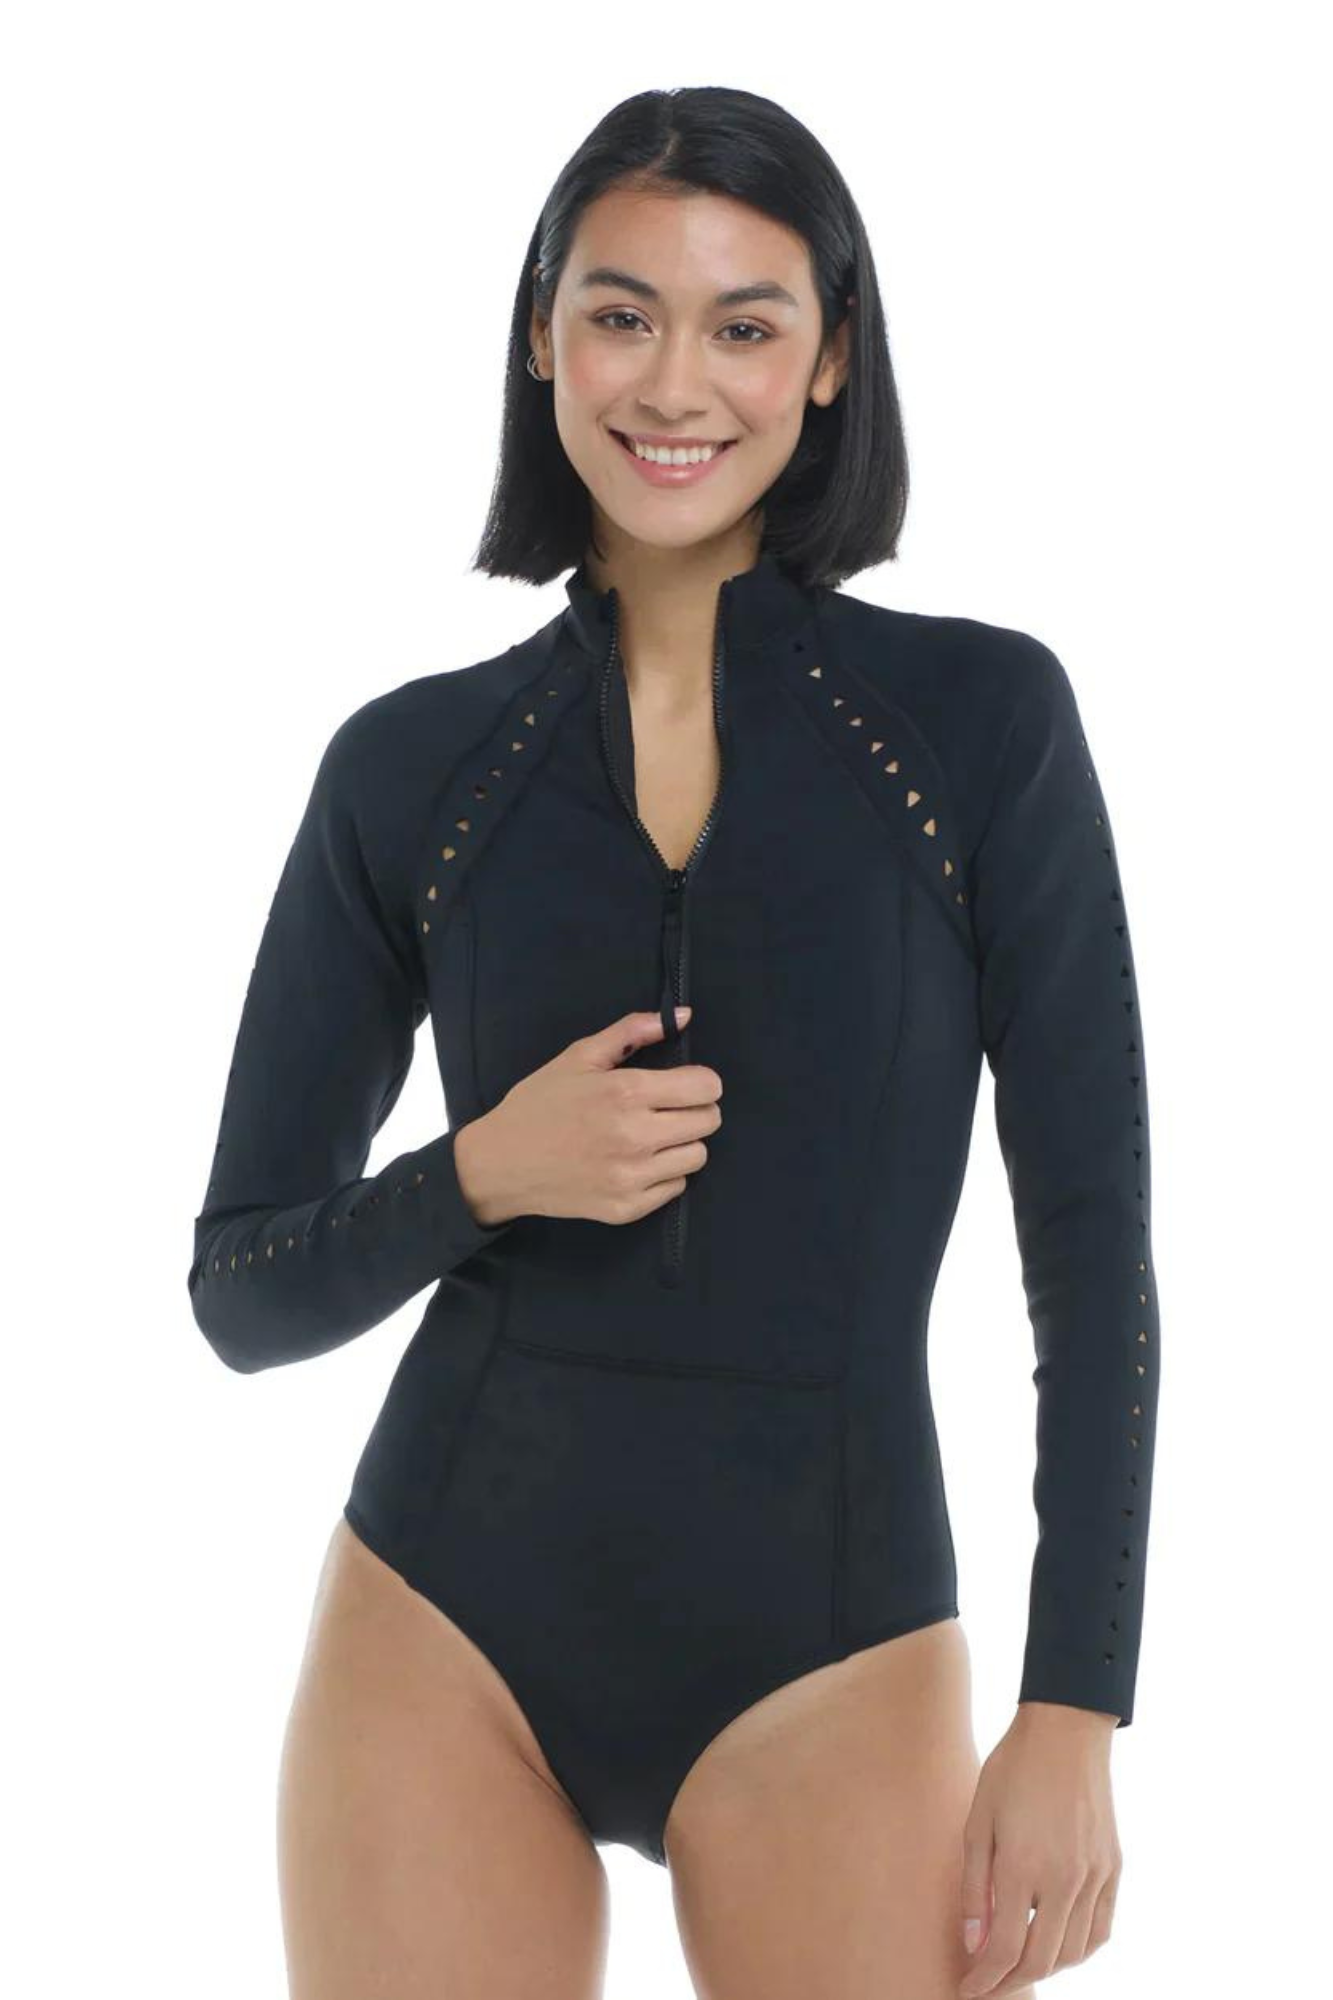 Constellation Langley Paddle Suit